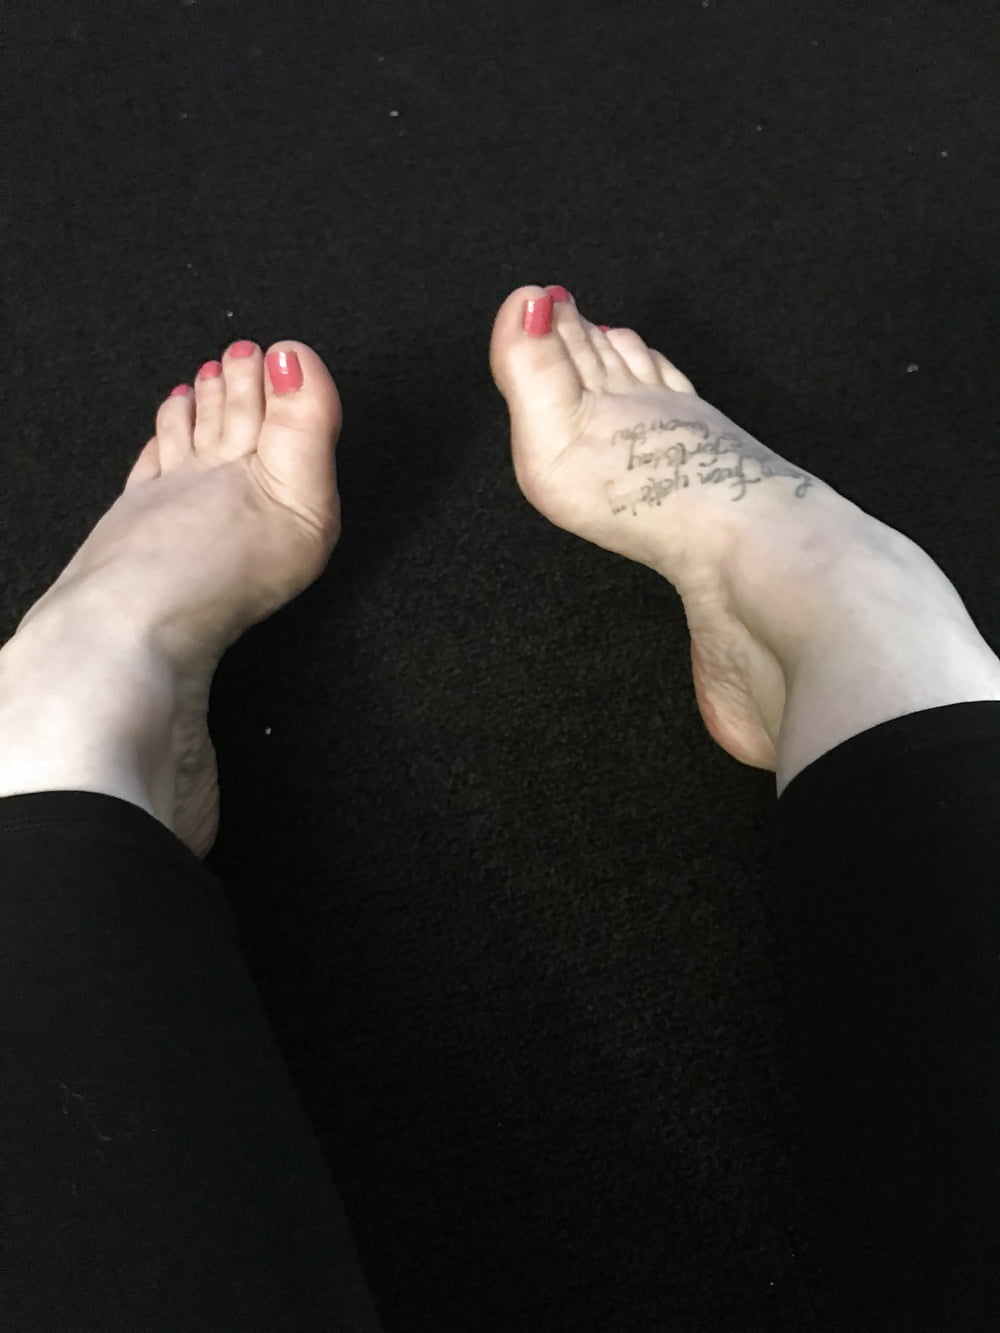 Caption Suck My Toes - See and Save As you want to suck my toes porn pict - 4crot.com